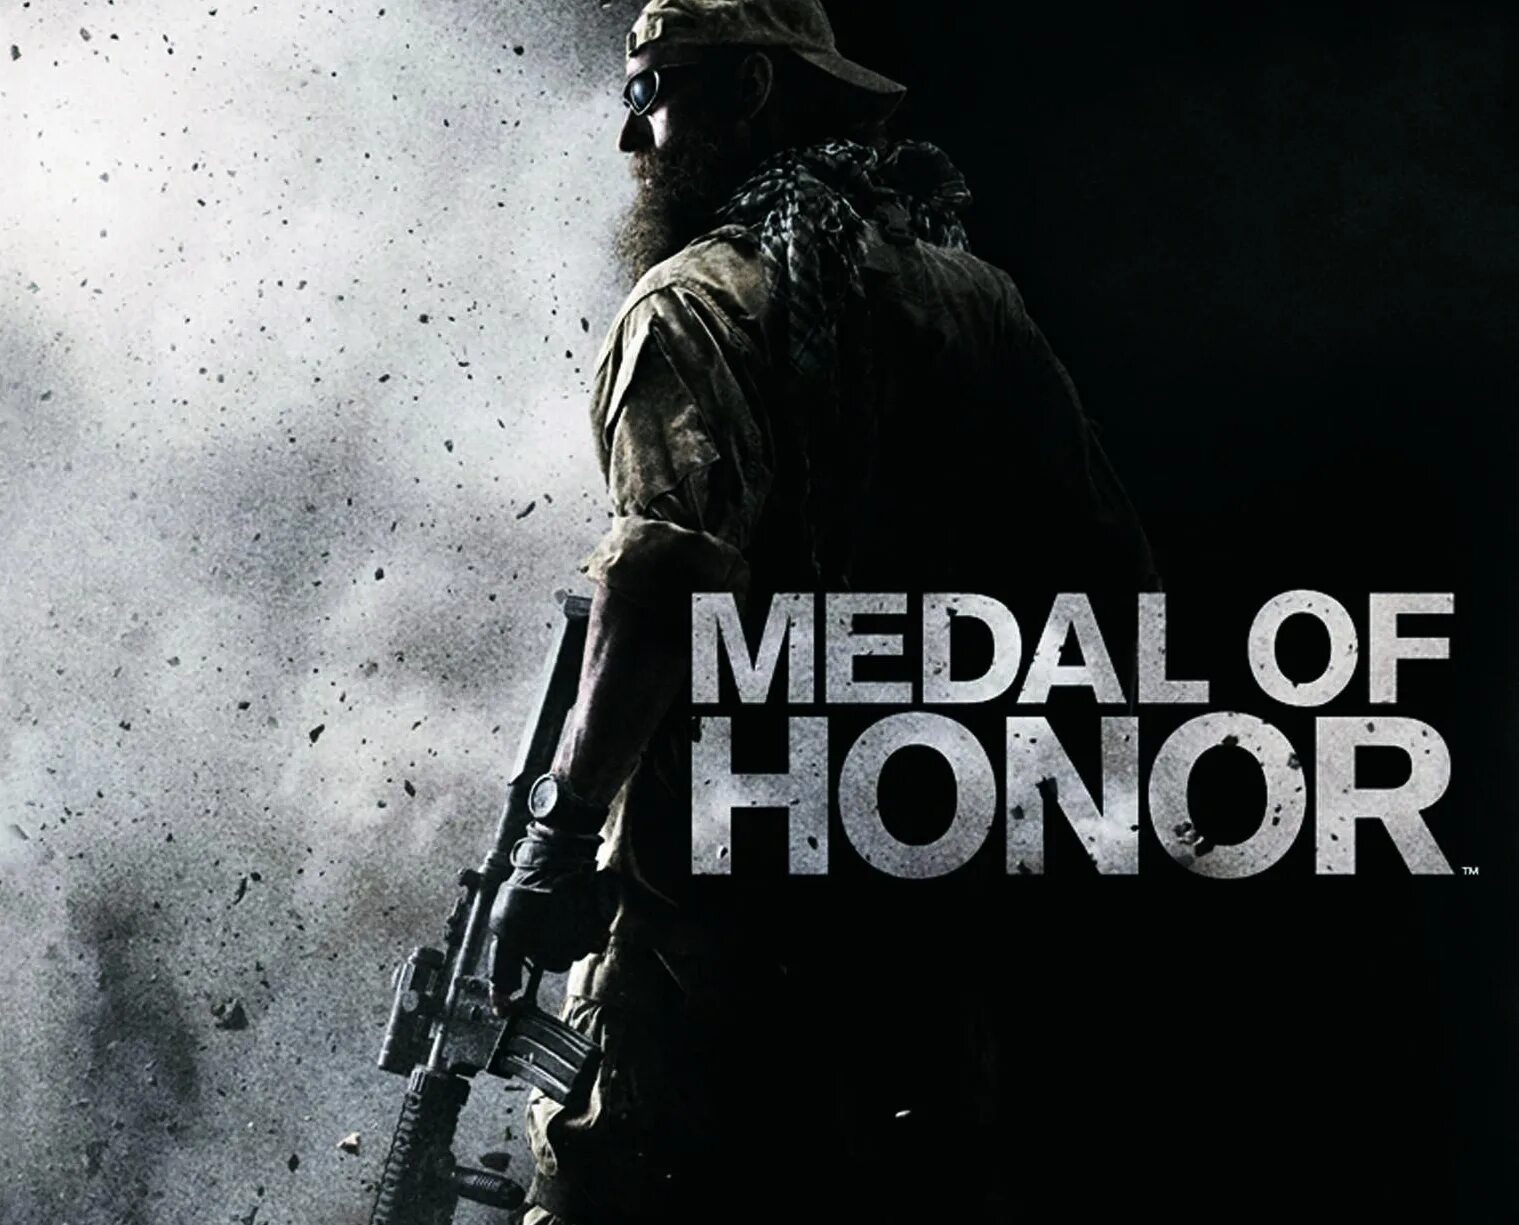 Medal of Honor Limited Edition 2010. Медаль оф хонор 2010. Medal of Honor Xbox 360. Medal of Honor 2010 обложка. Системные medal of honor